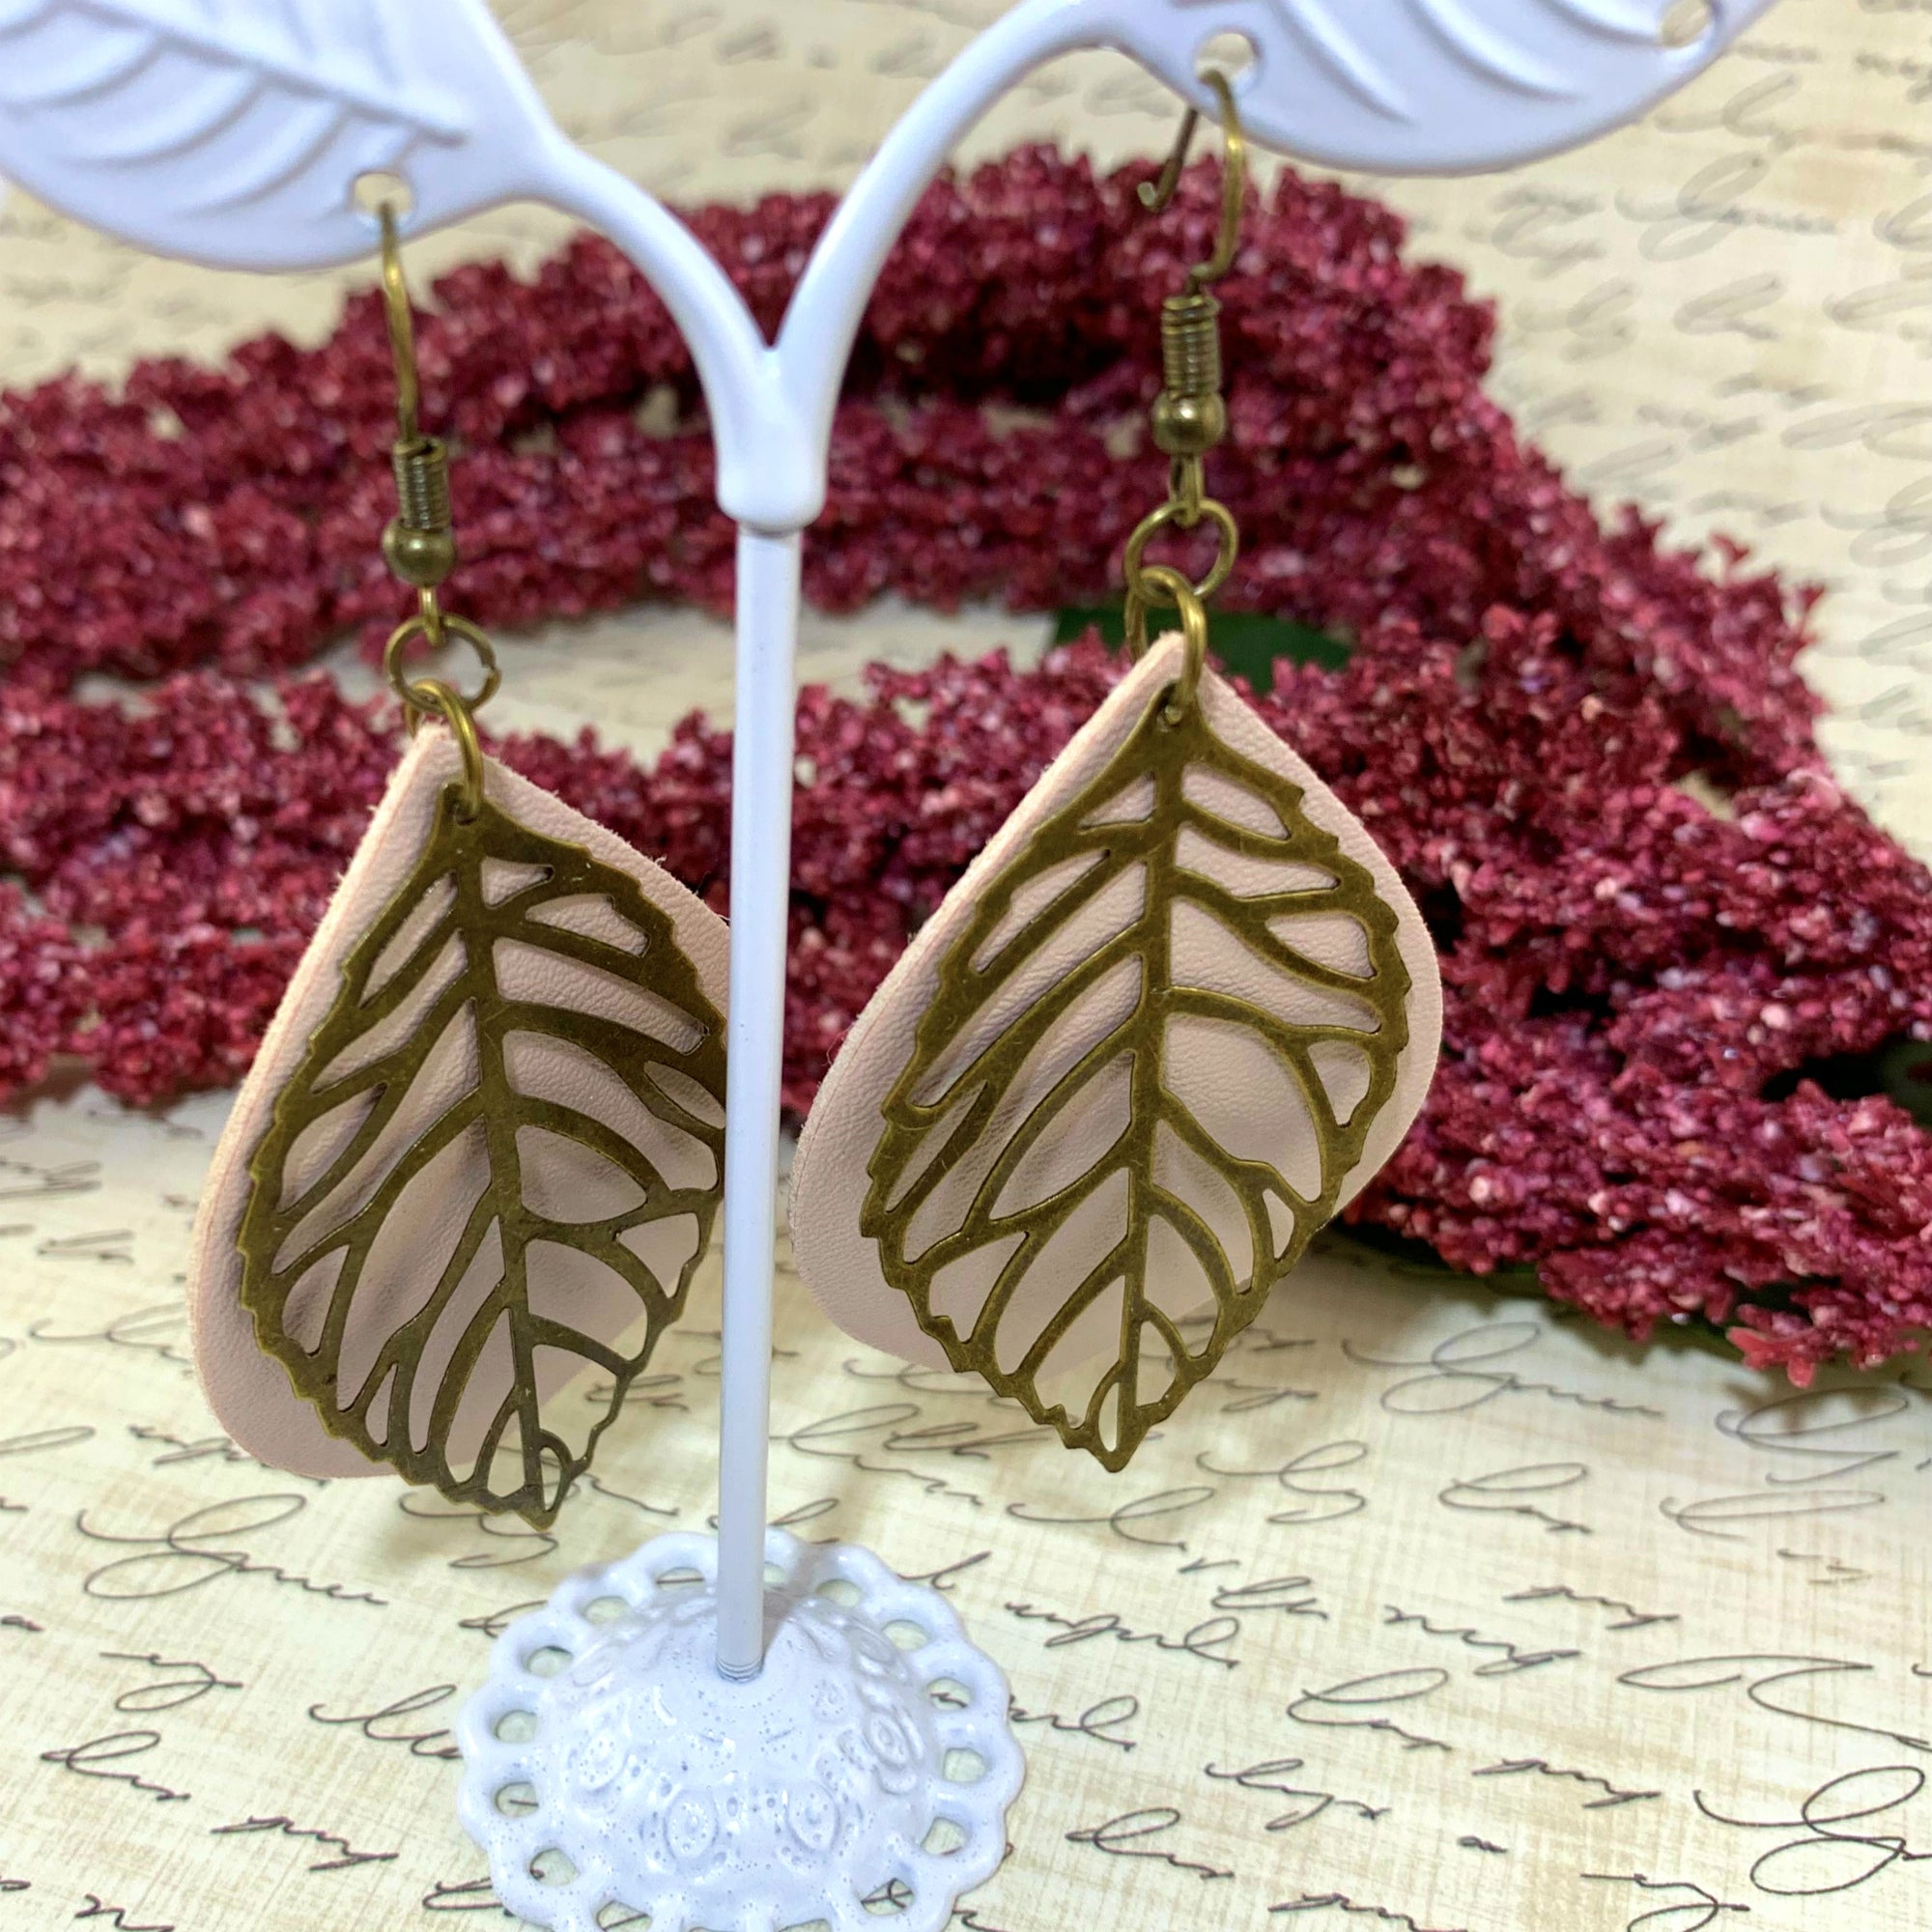 Drop Leaf Leather Earrings | Maycomb Mercantile